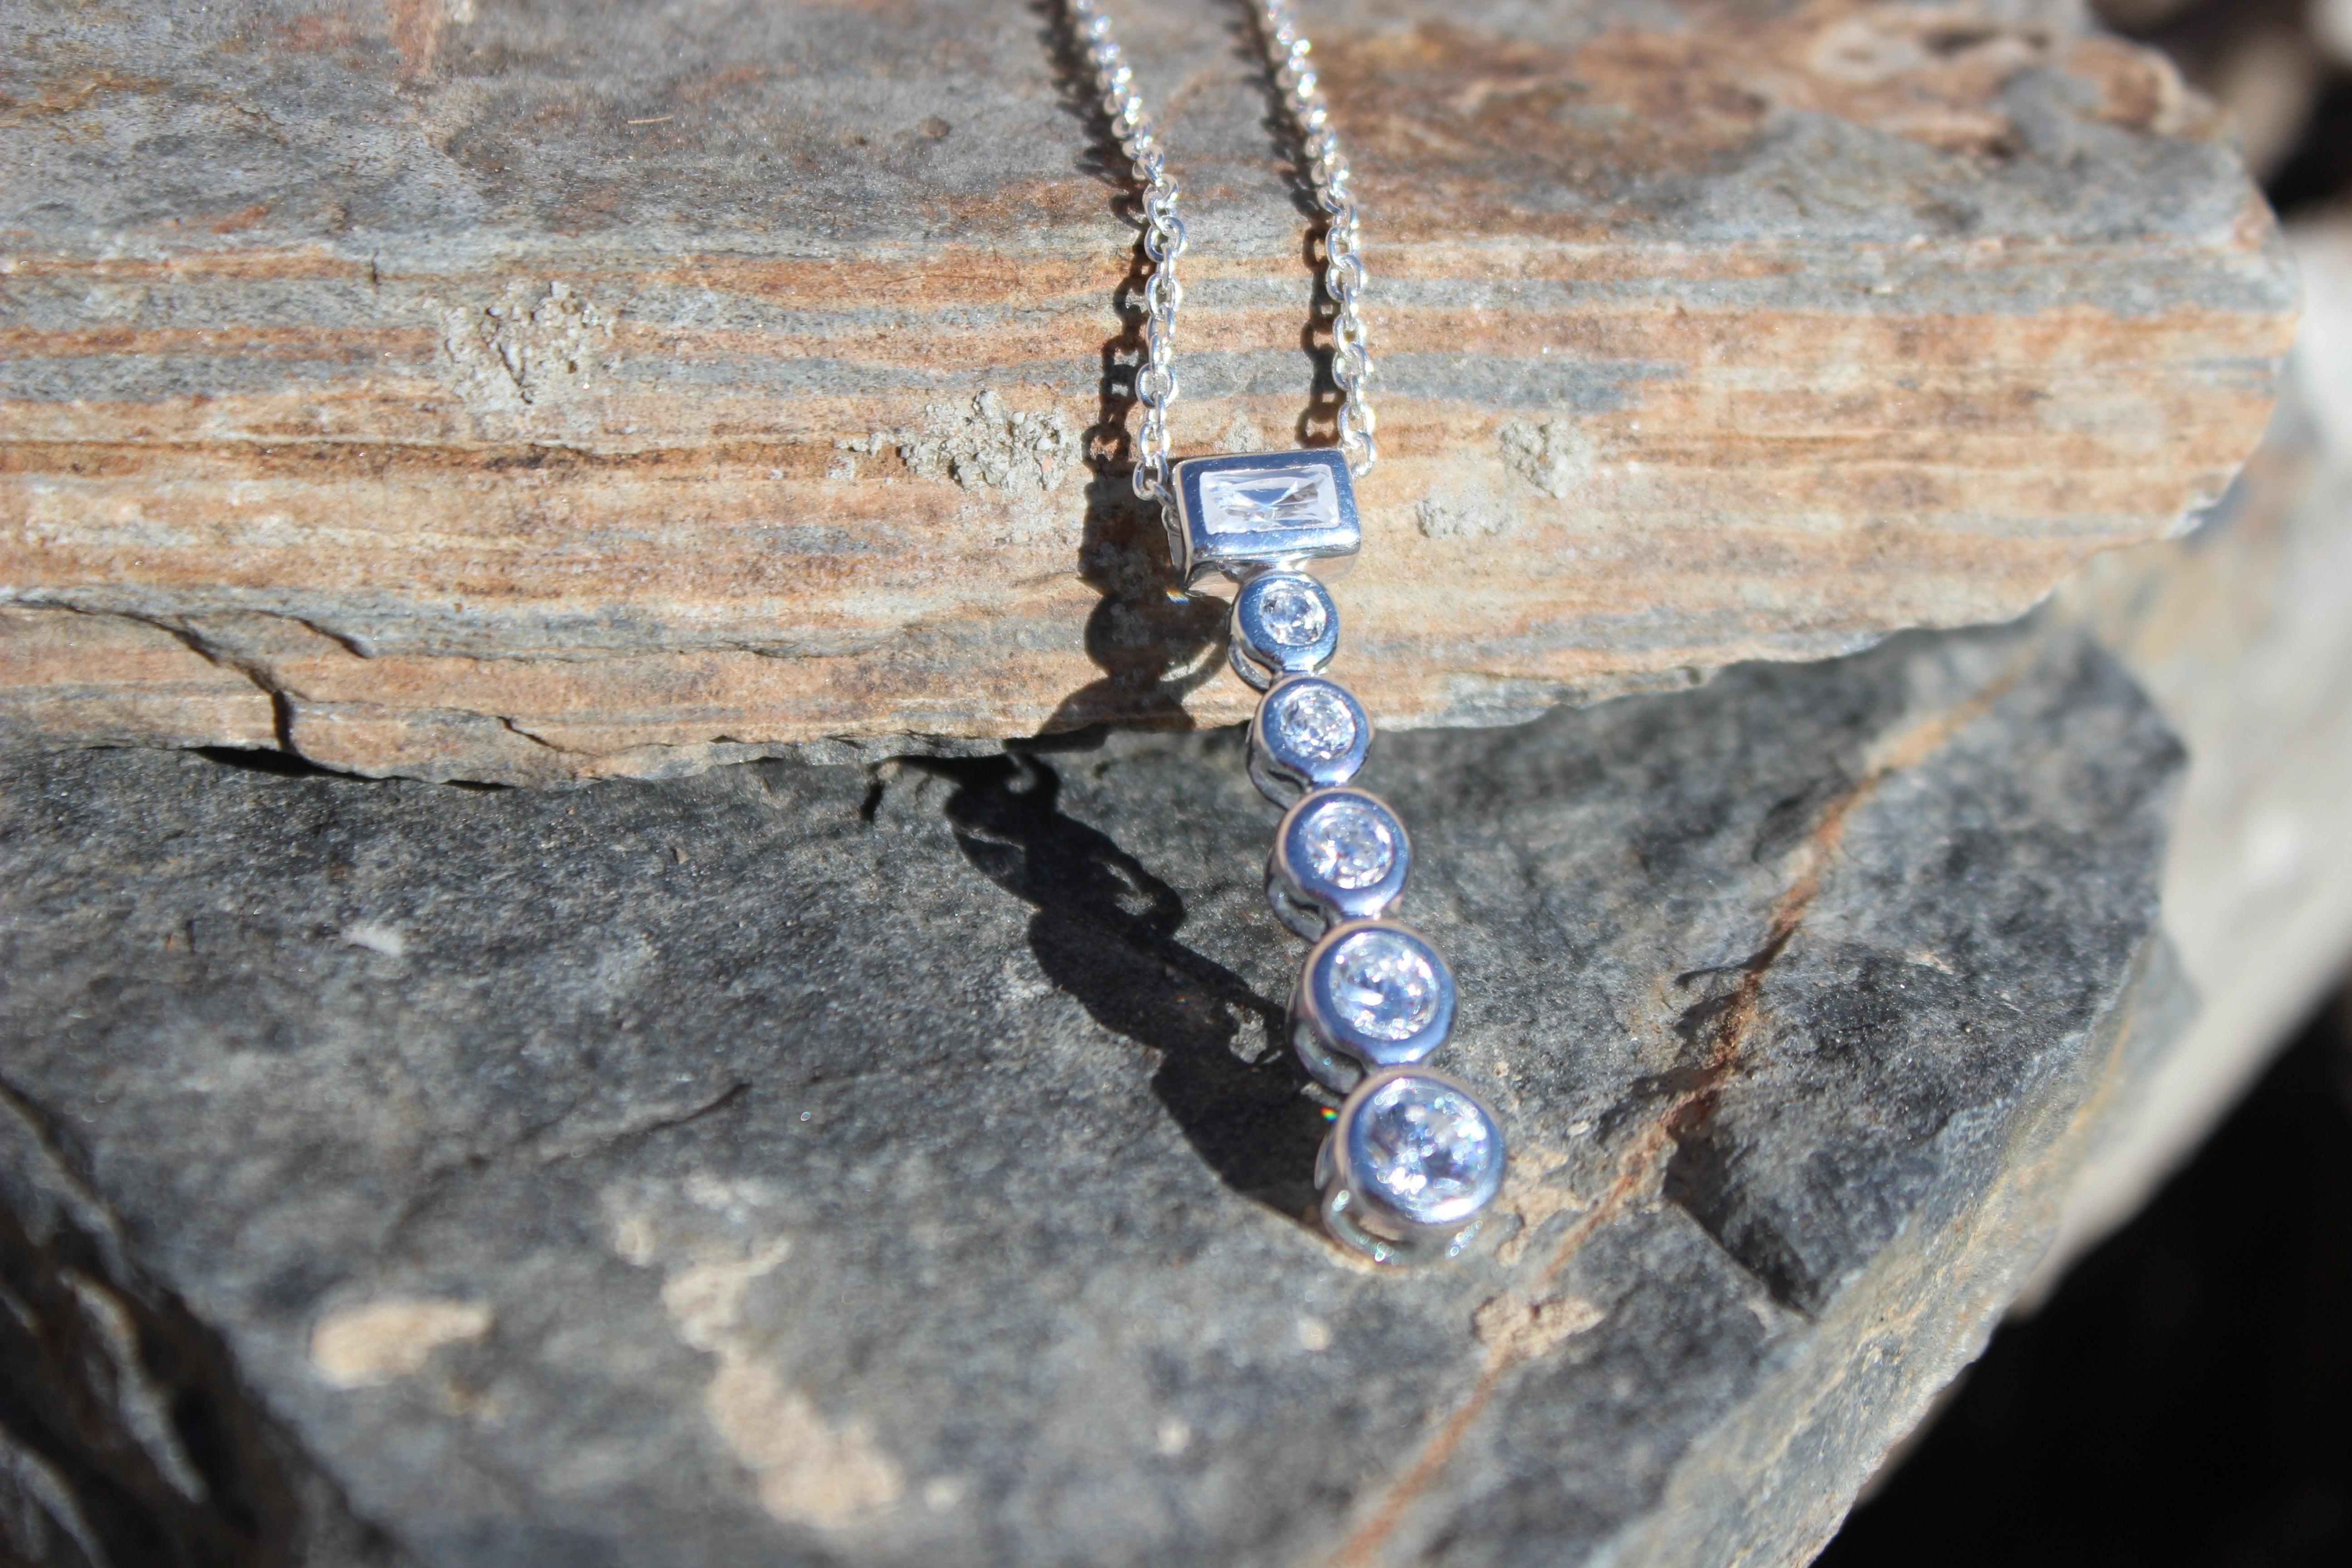 Alamode Rhodium Plating 925 Sterling Silver Chain Pendant with AAA CZ in Clear - Flyclothing LLC